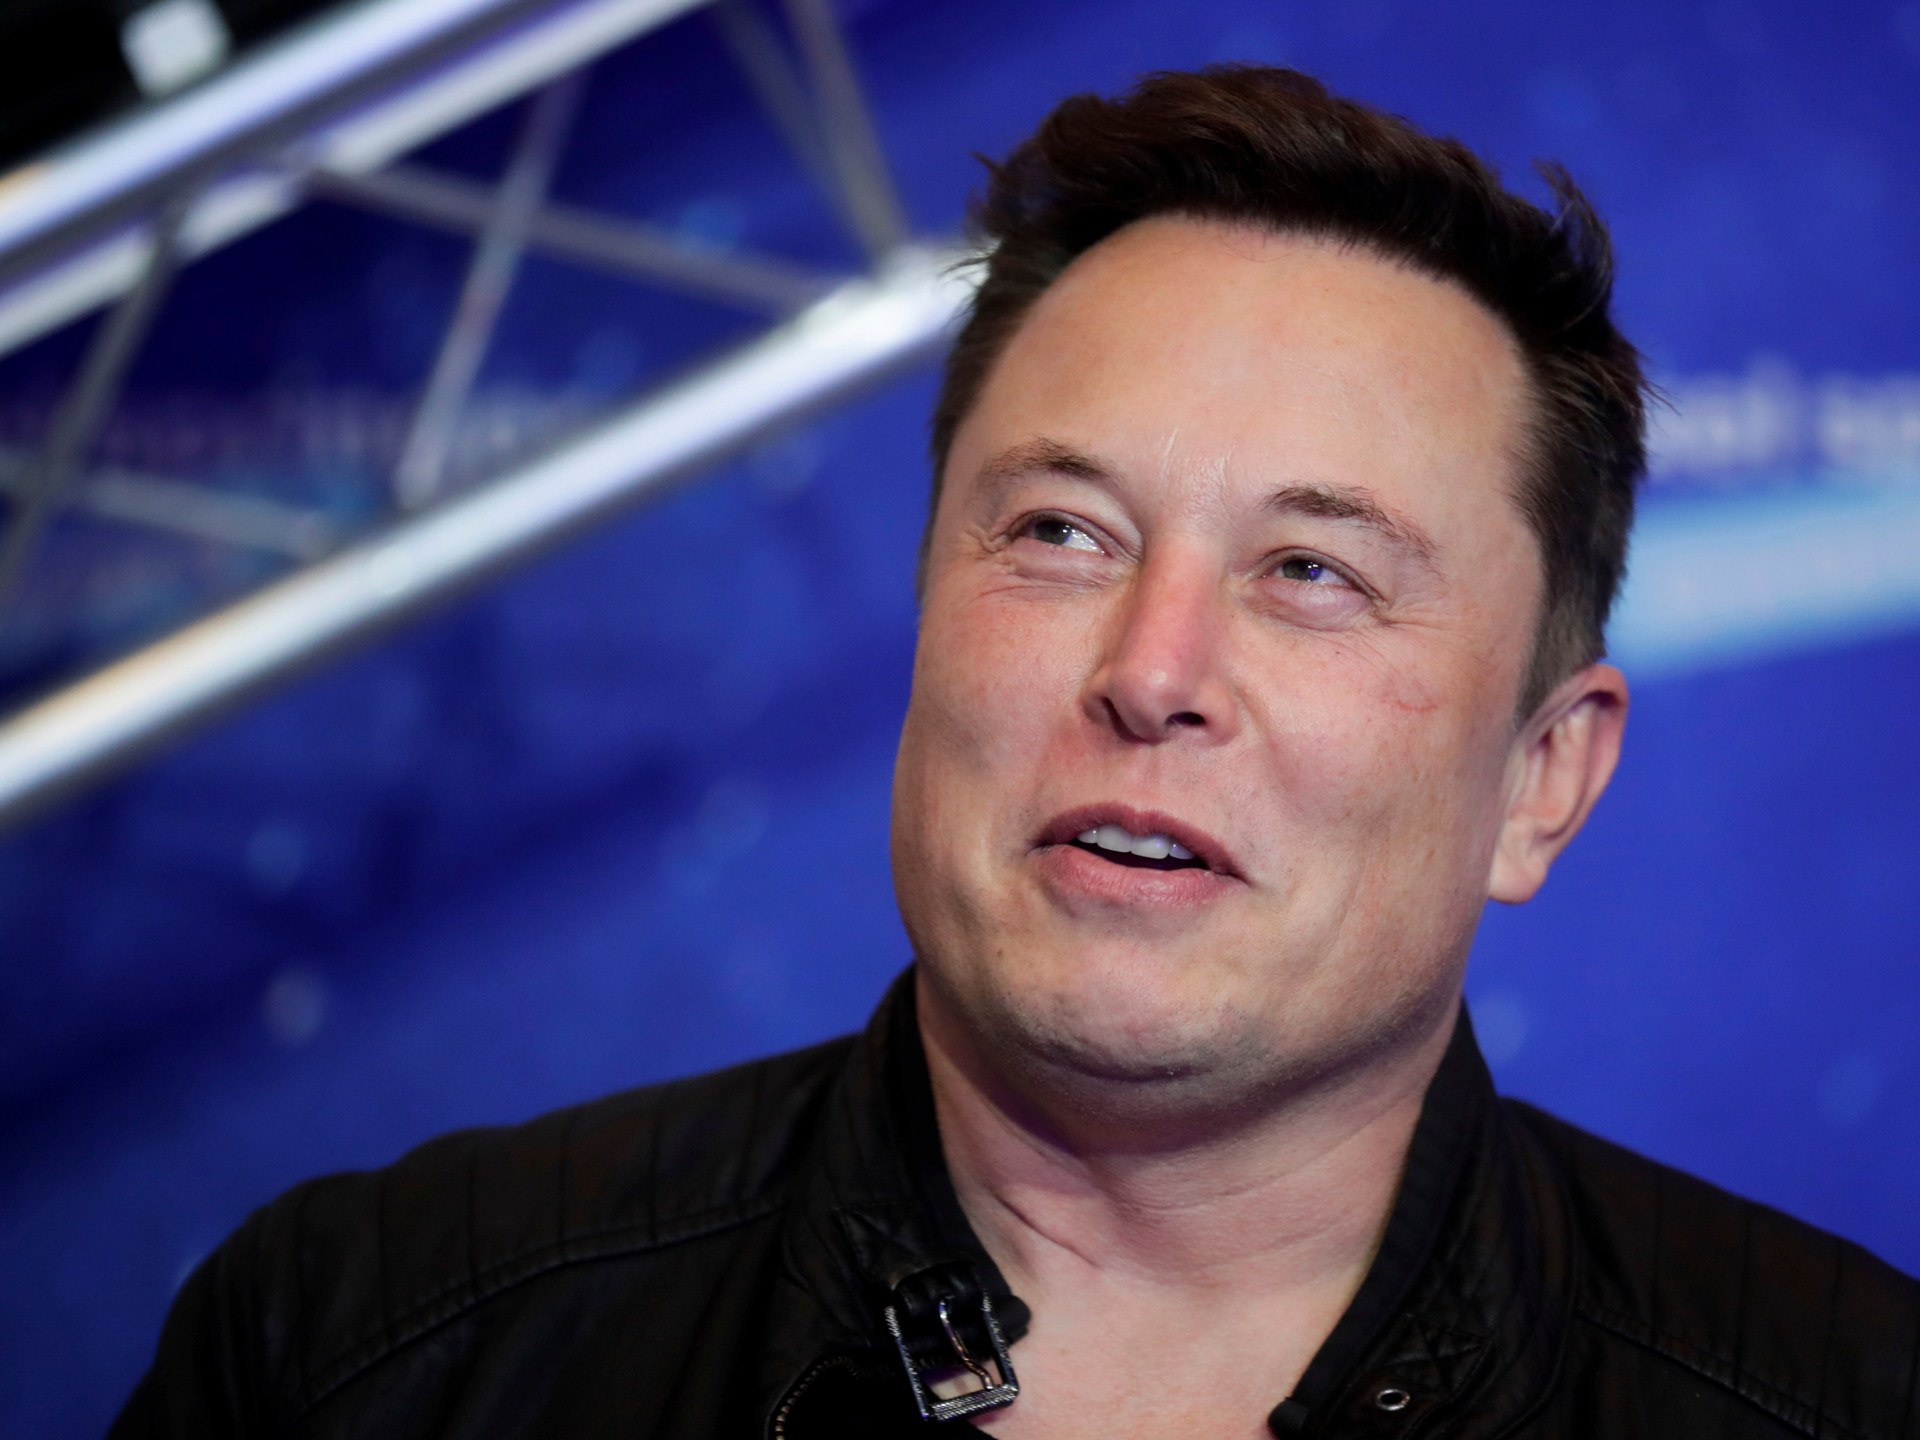 Elon Musk asks Twitter to vote on whether he should step down | Social Media